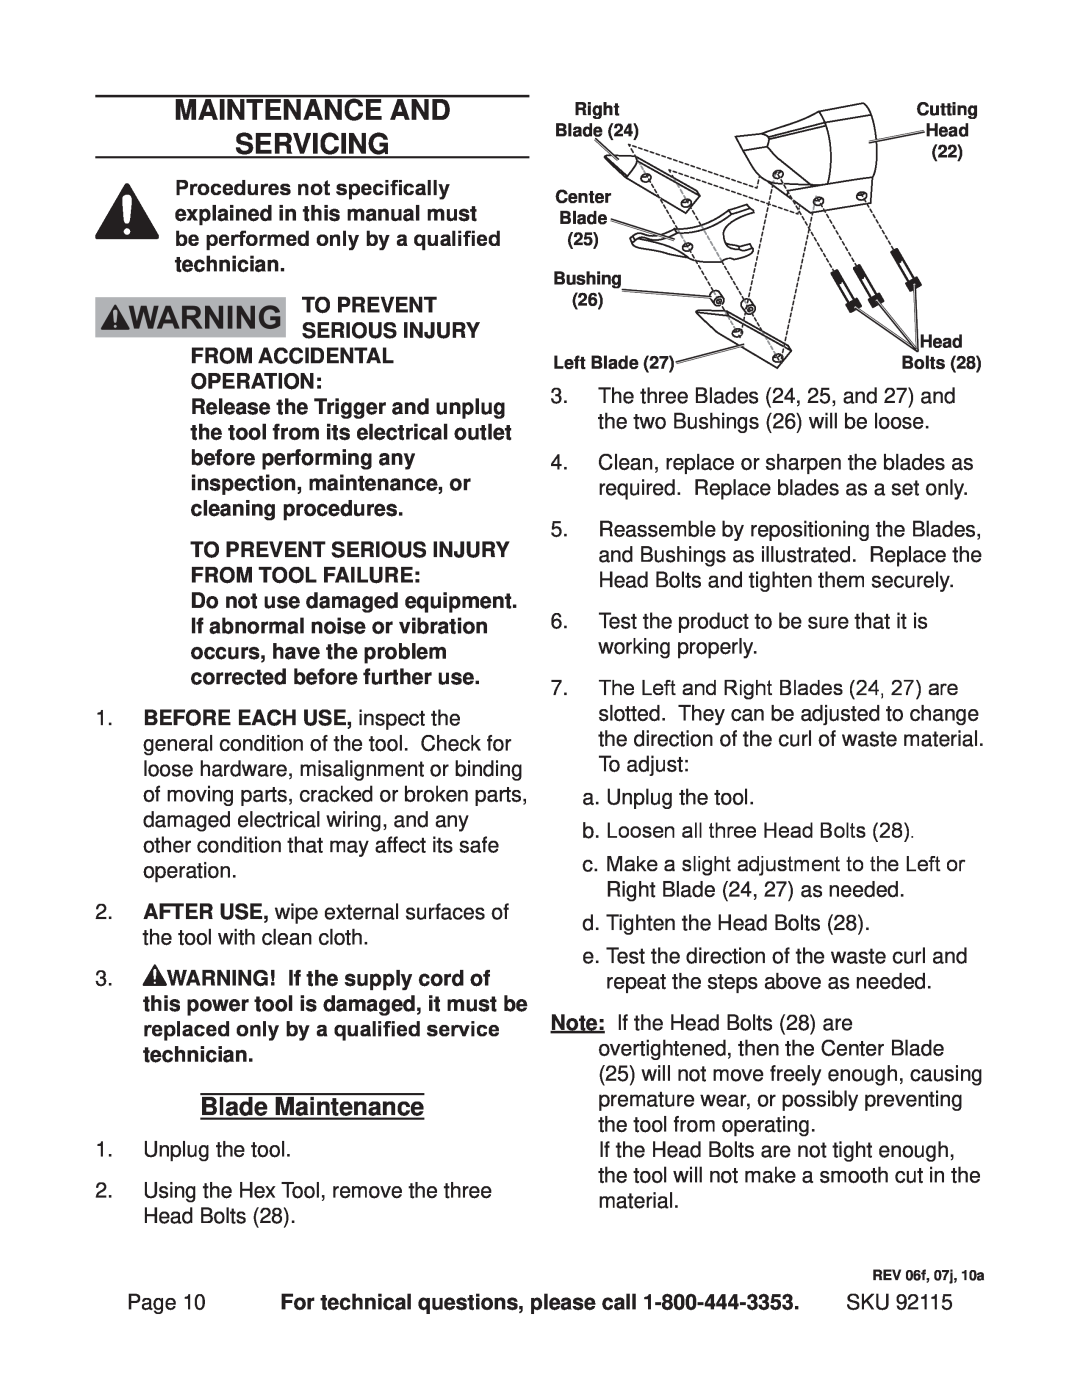 Chicago Electric 92115 operating instructions Maintenance And Servicing, Blade Maintenance 